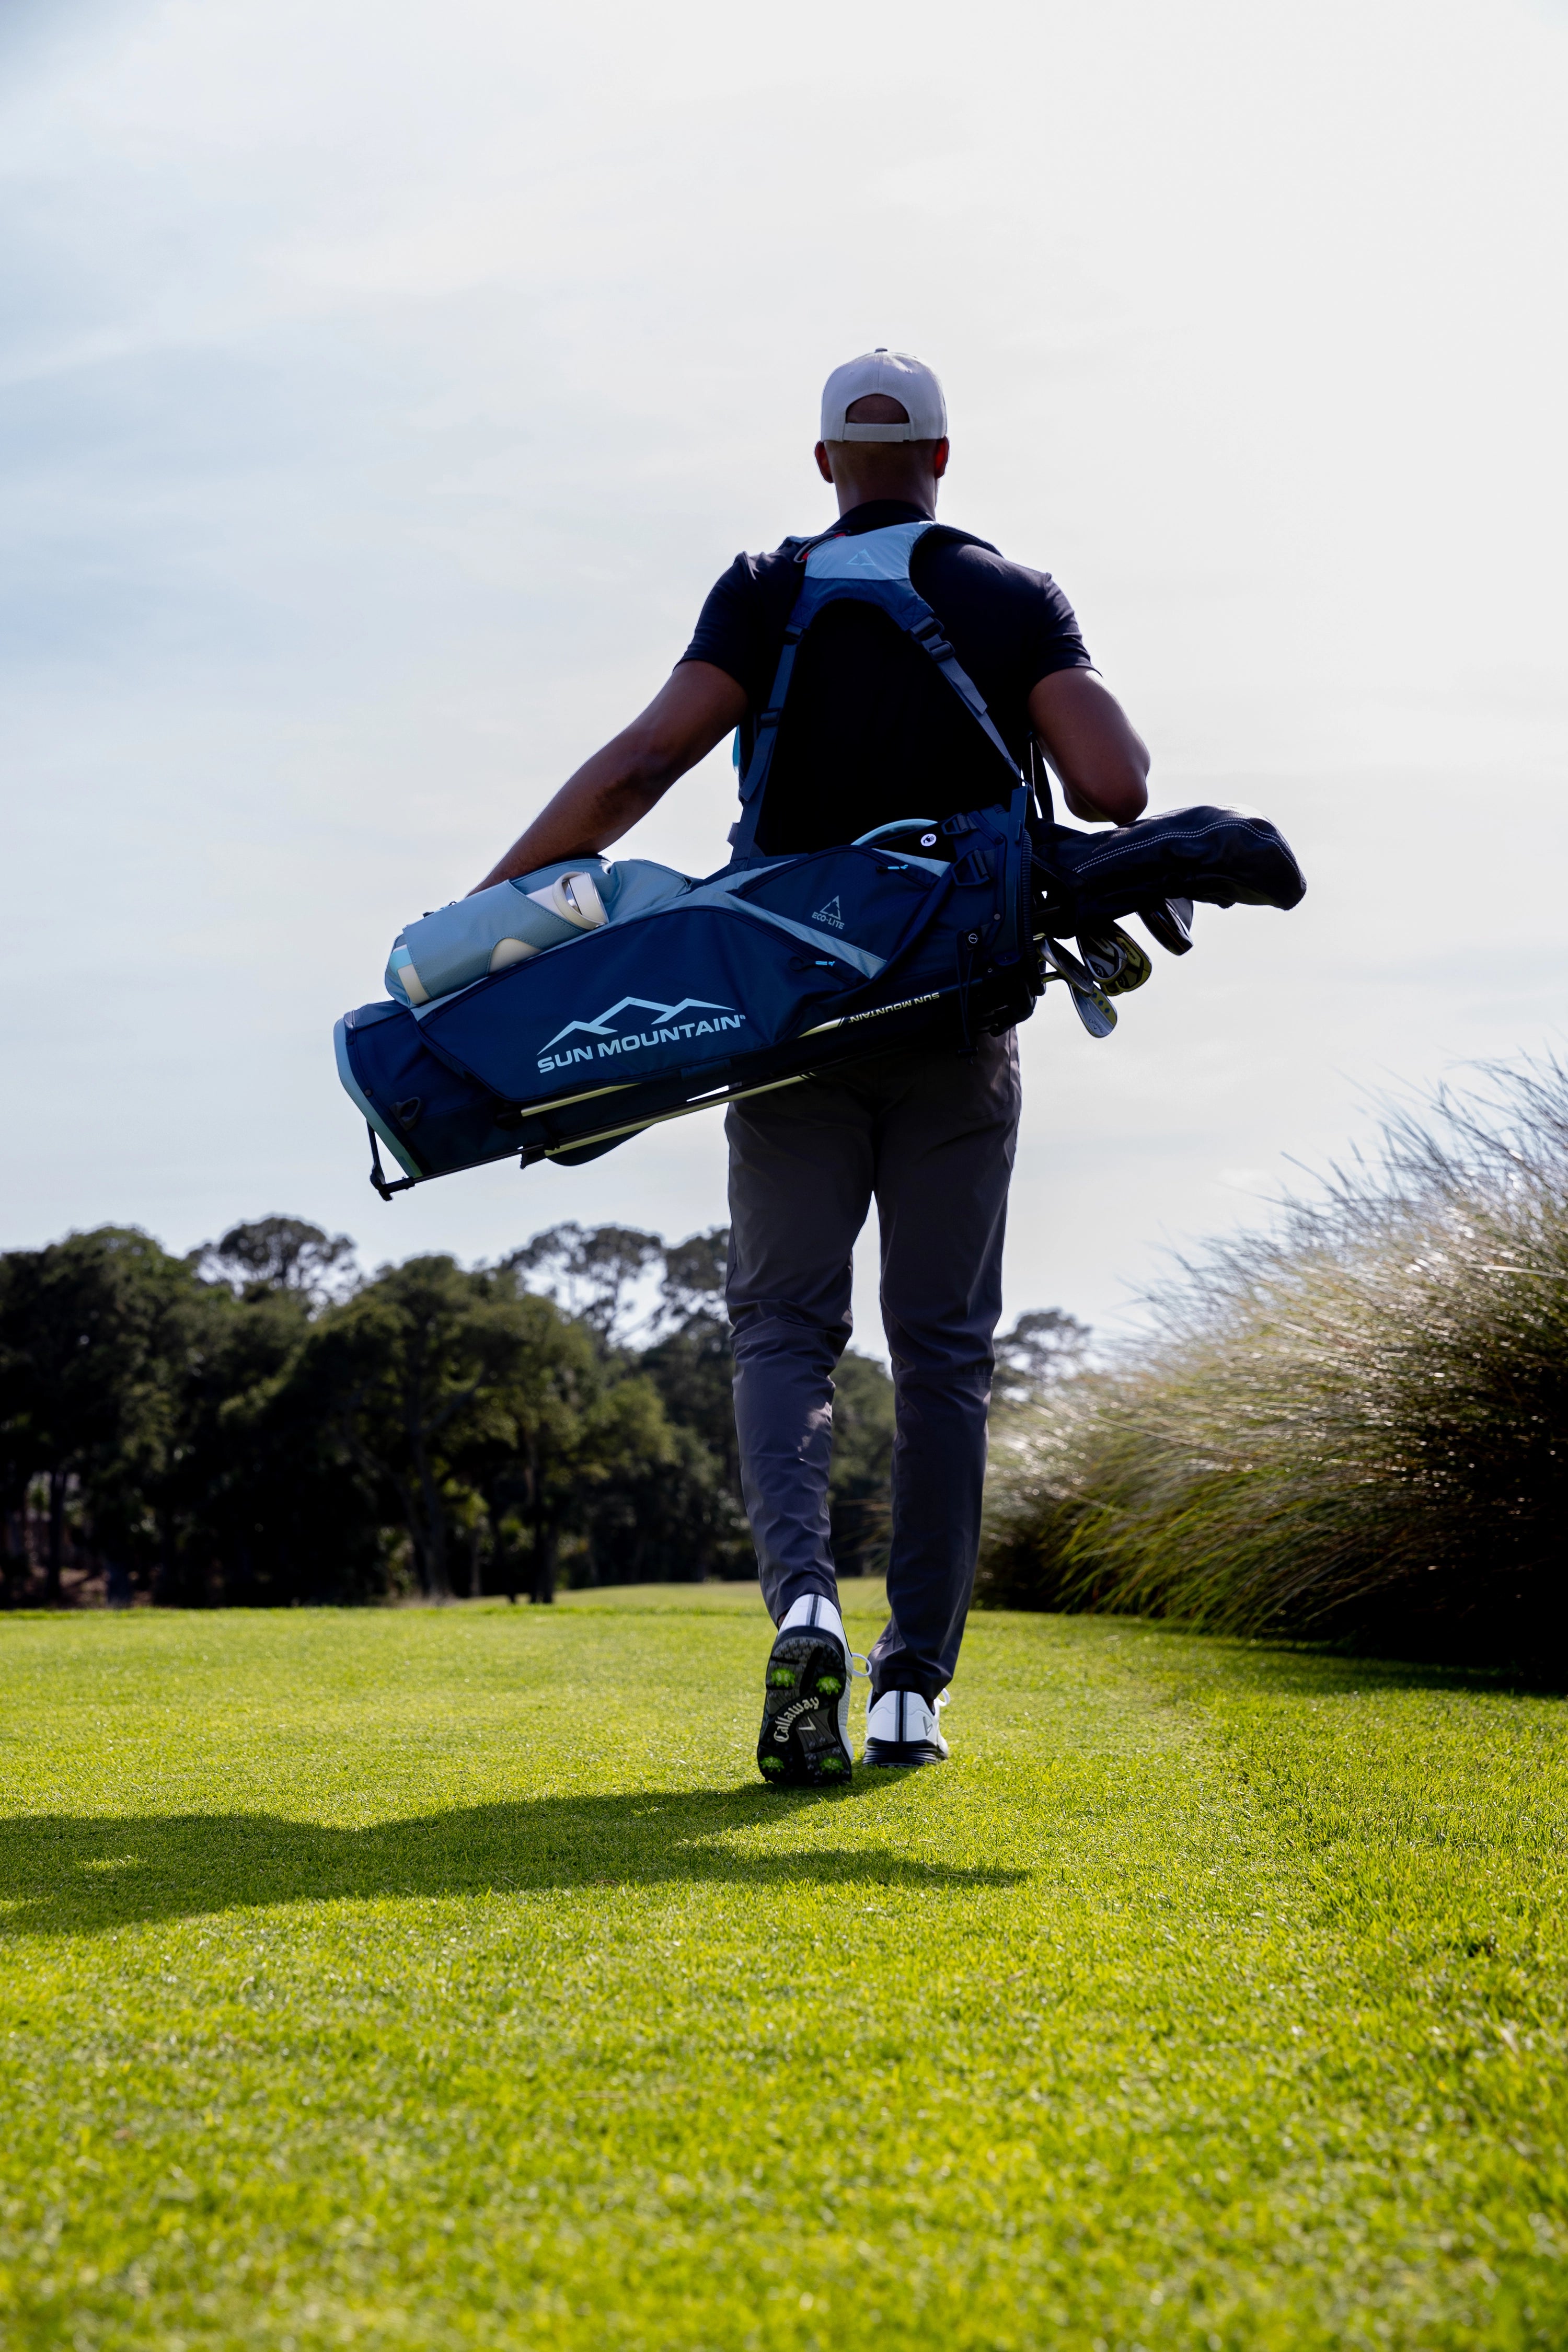 Game-changing golf bags